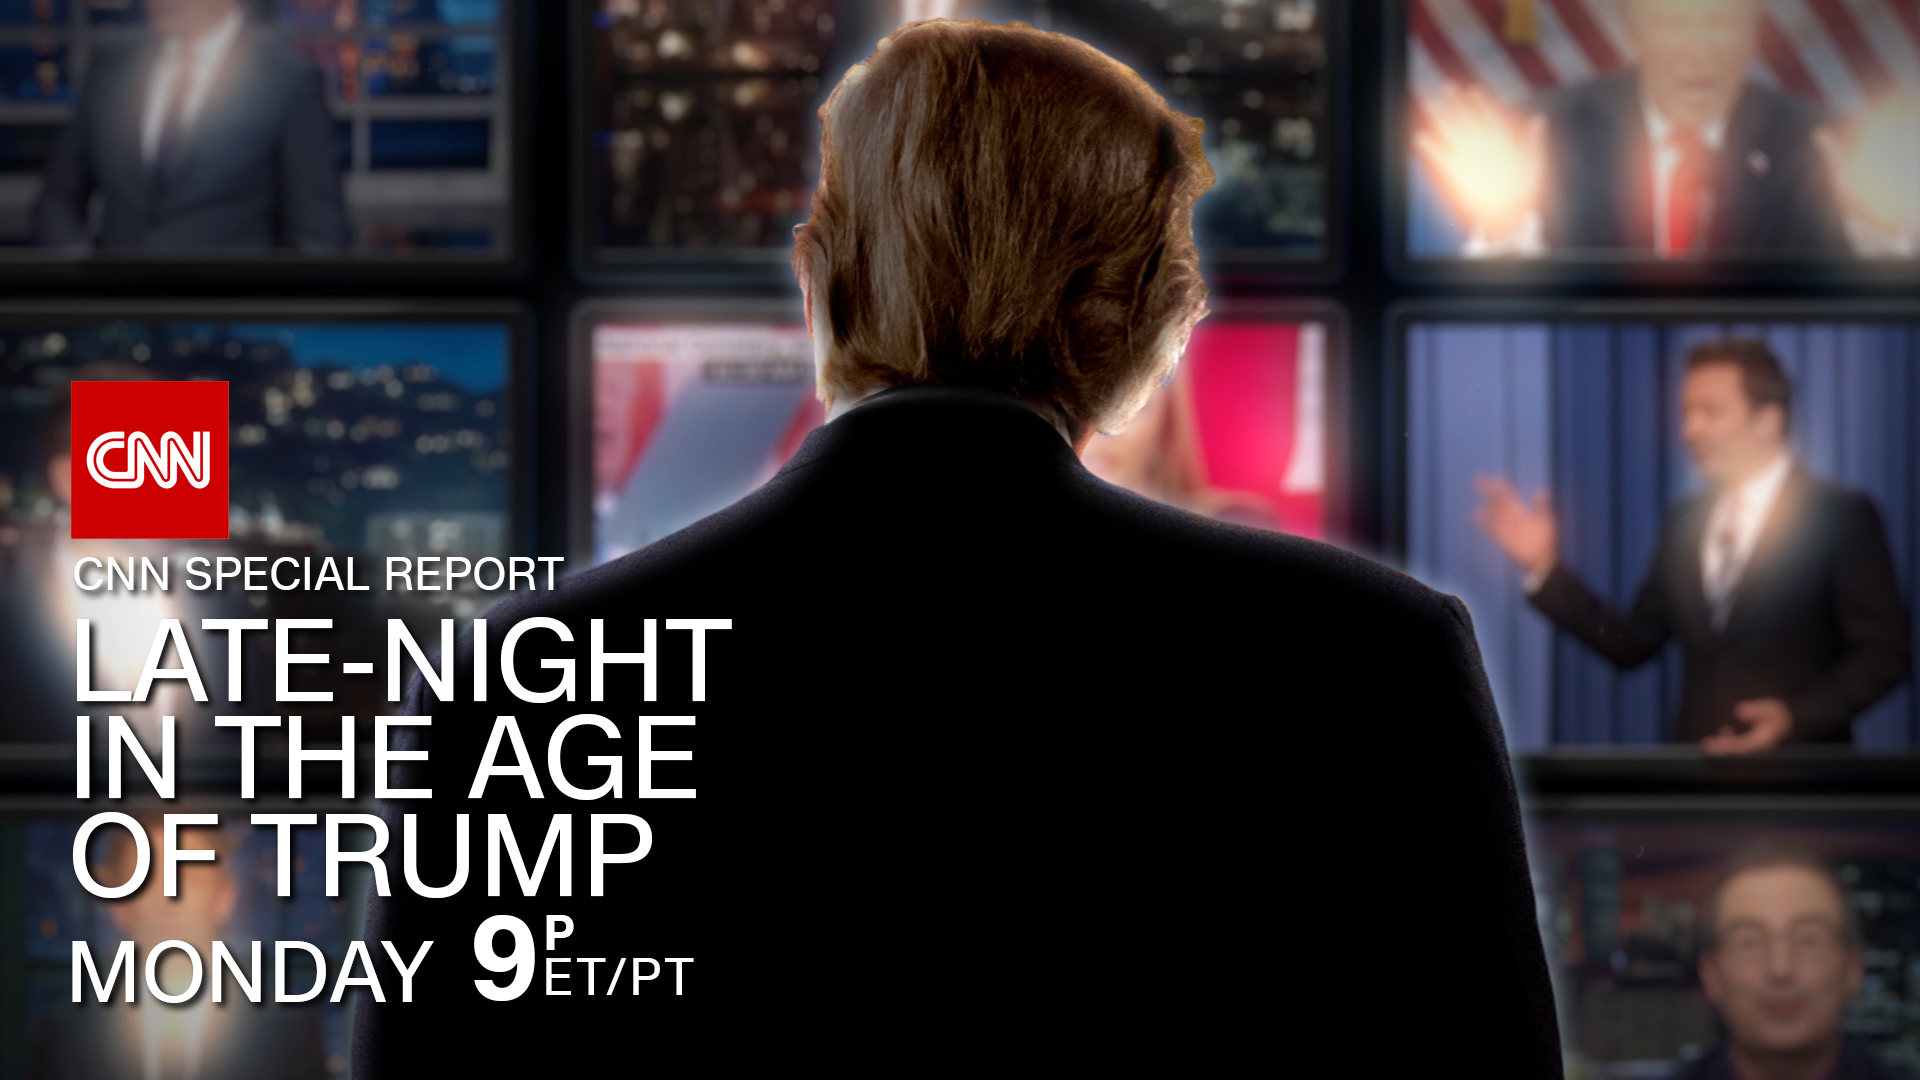 Cnn Special Reports Presents “late Night In The Age Of Trump” 